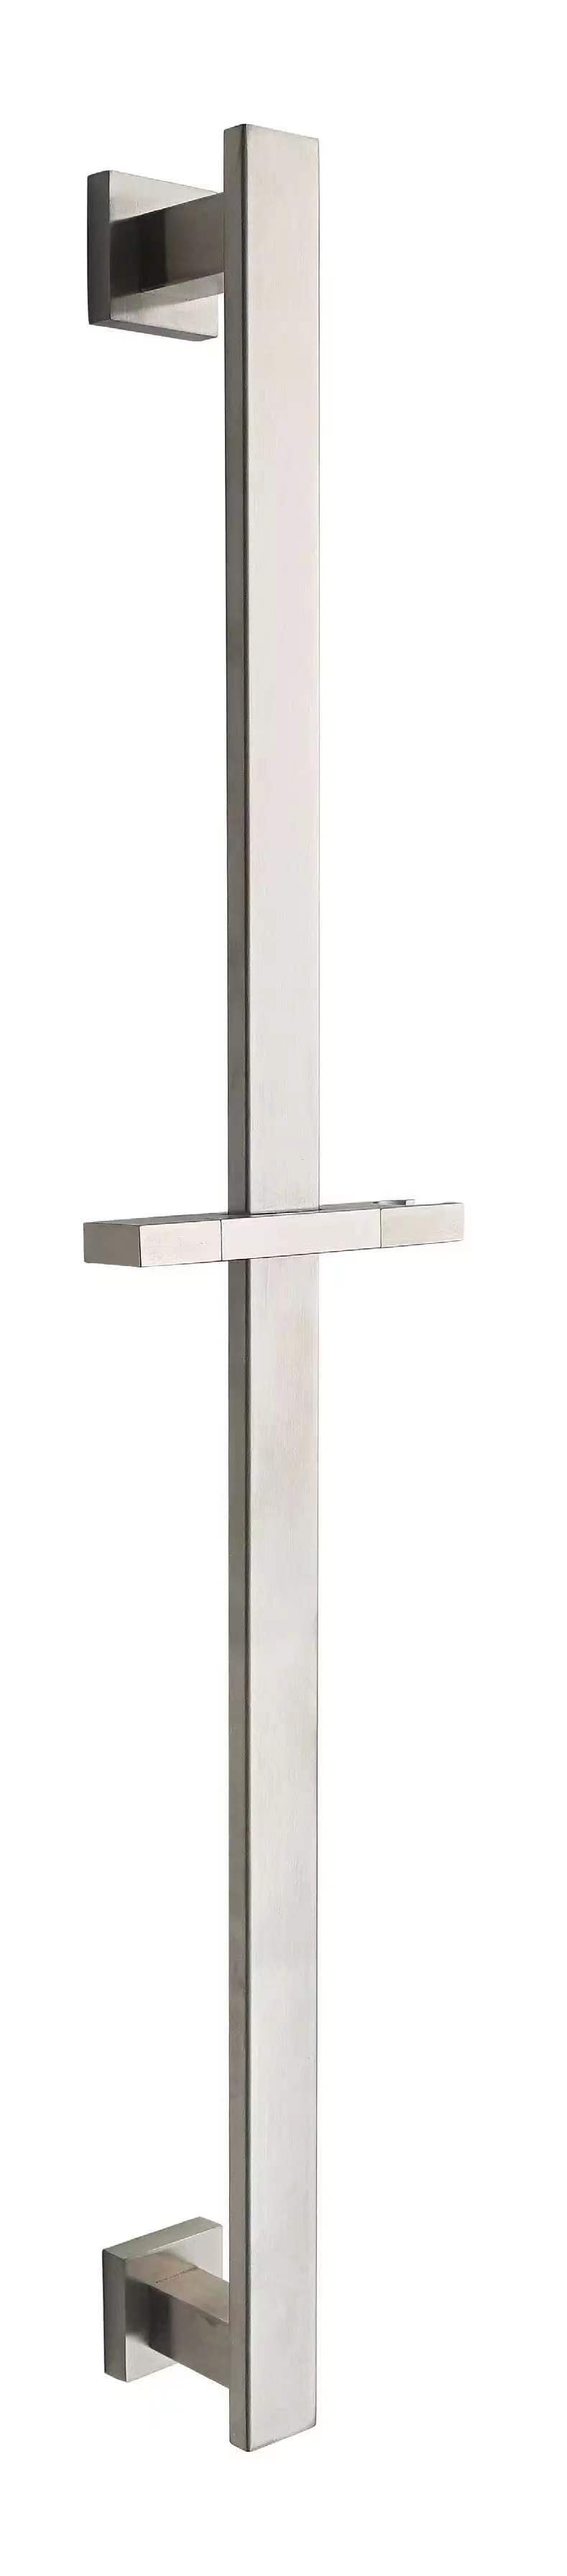 DAX Adjustable Square Slide Bar with Hand Shower Chrome Finish (DAX-1102)